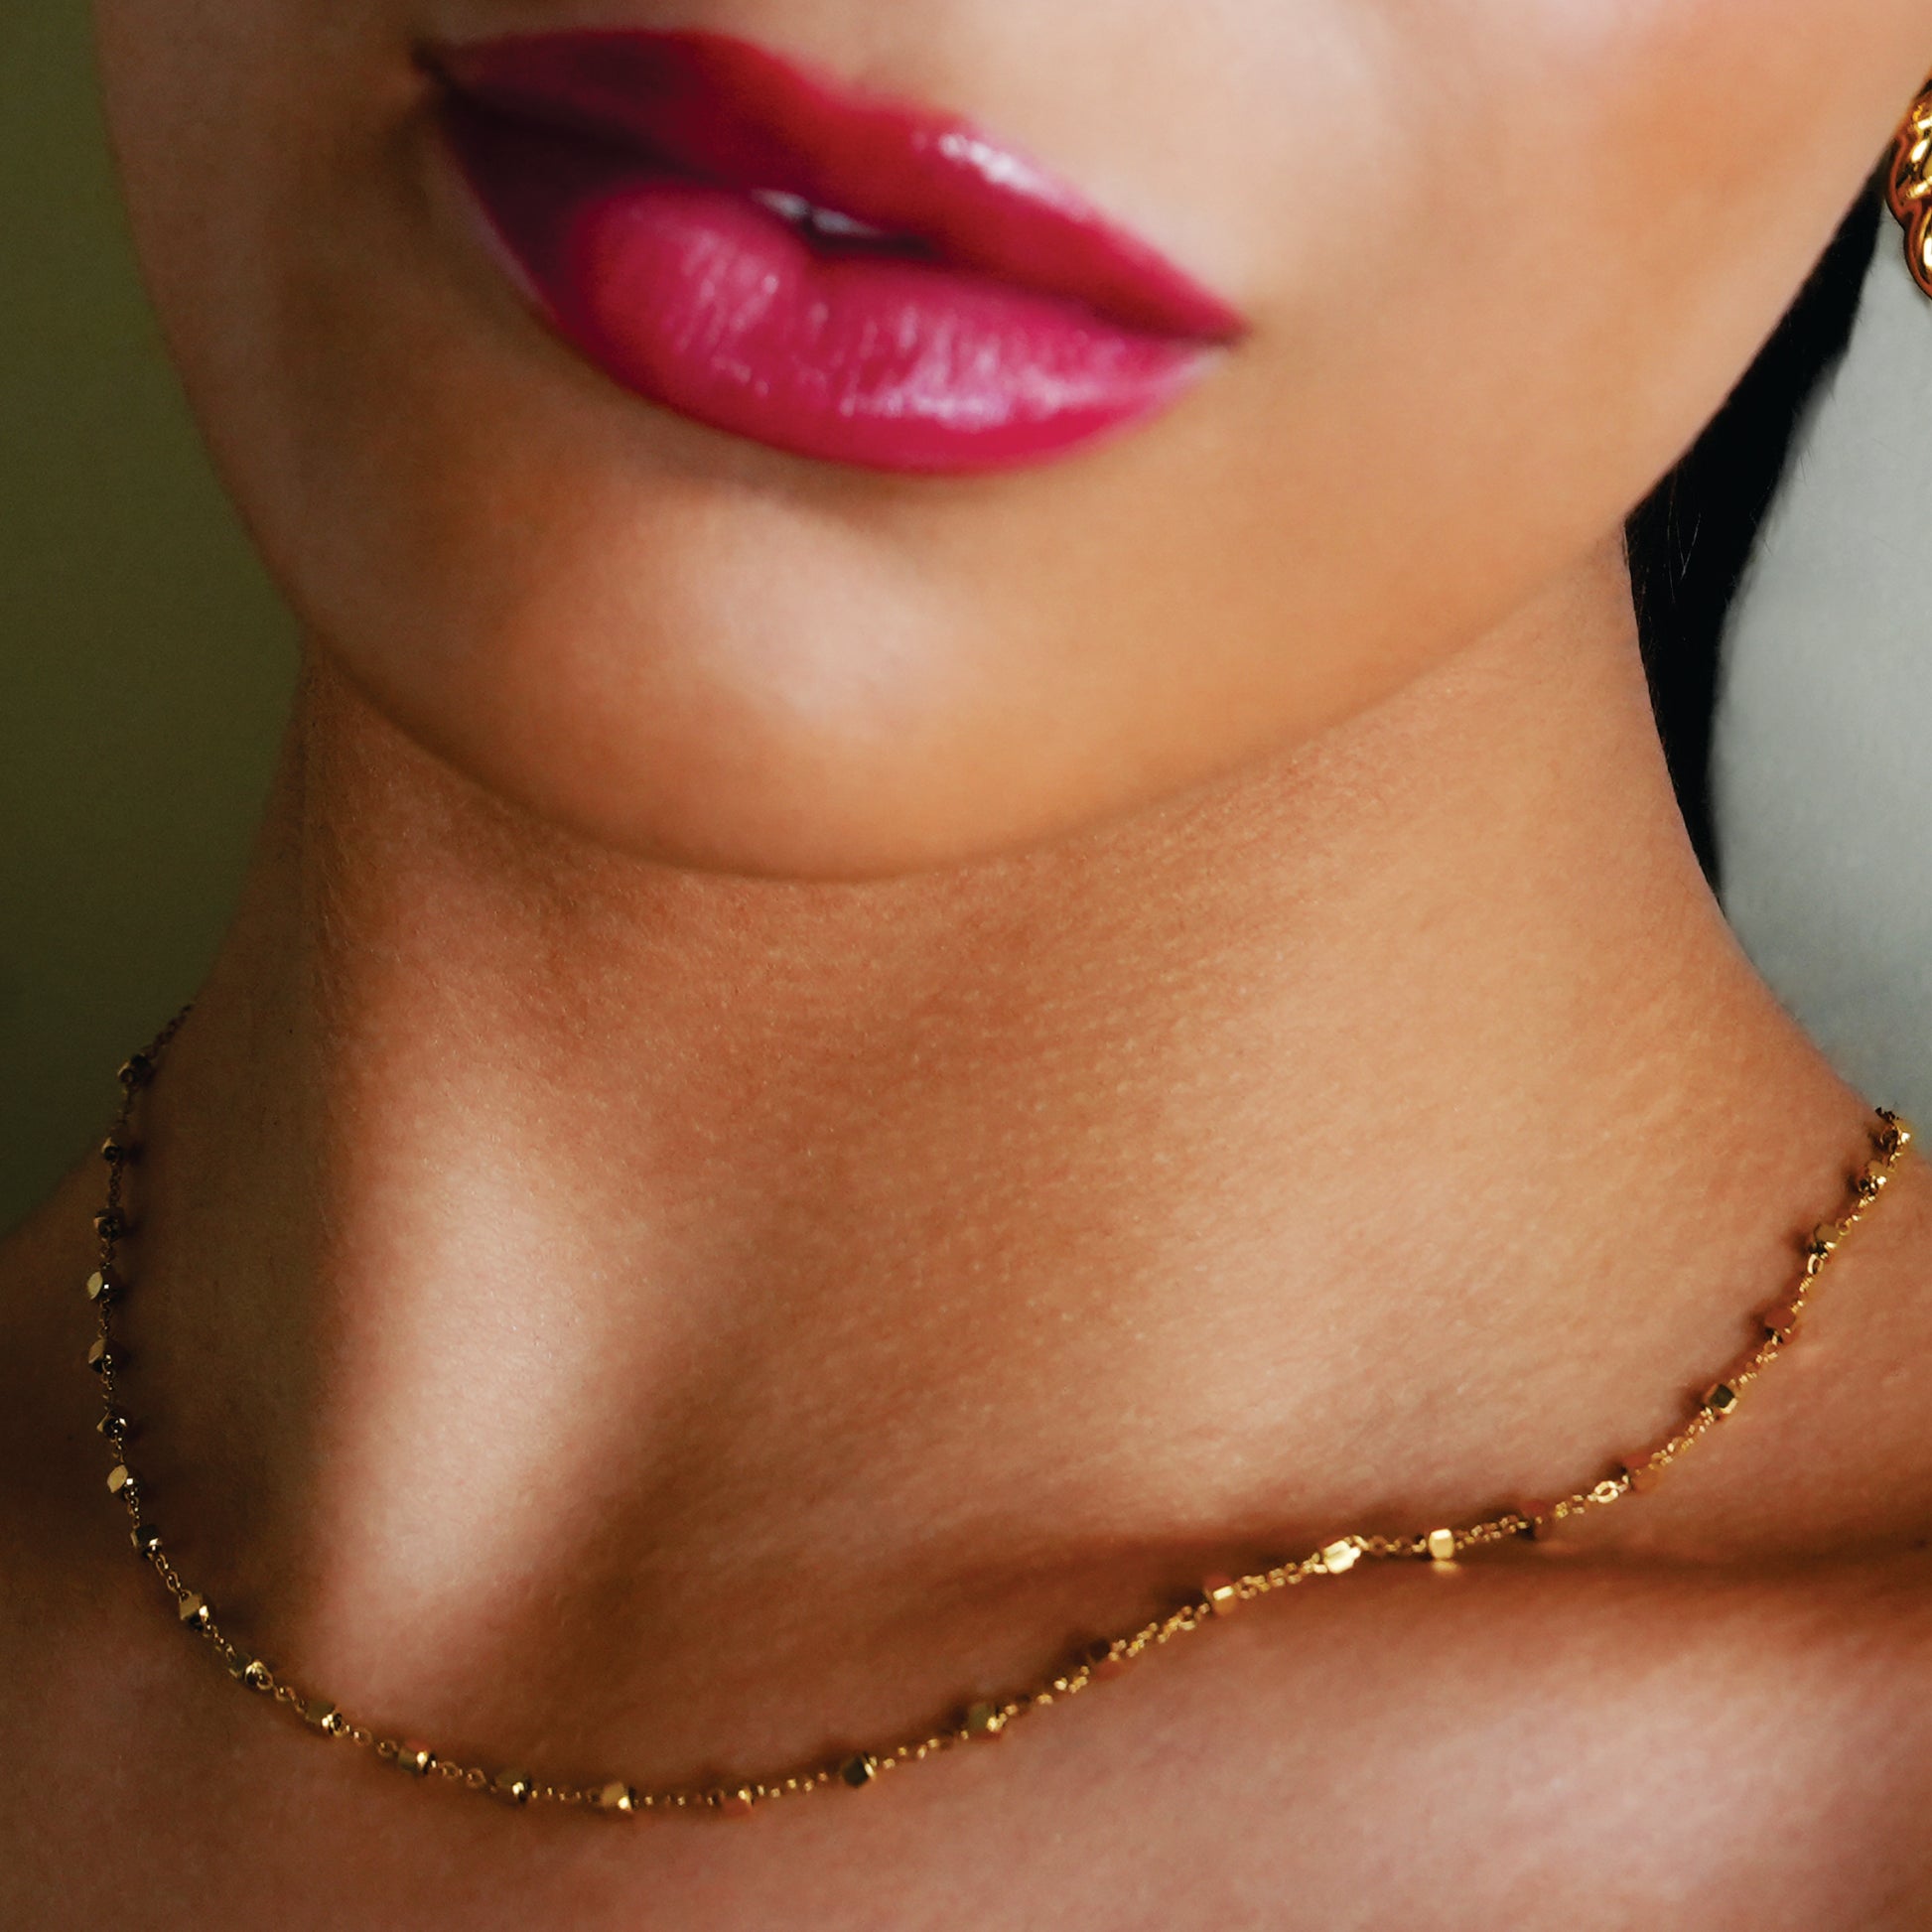 Style: AUREOLE 8743: Essential Daily Chain with Delicate Square Beads